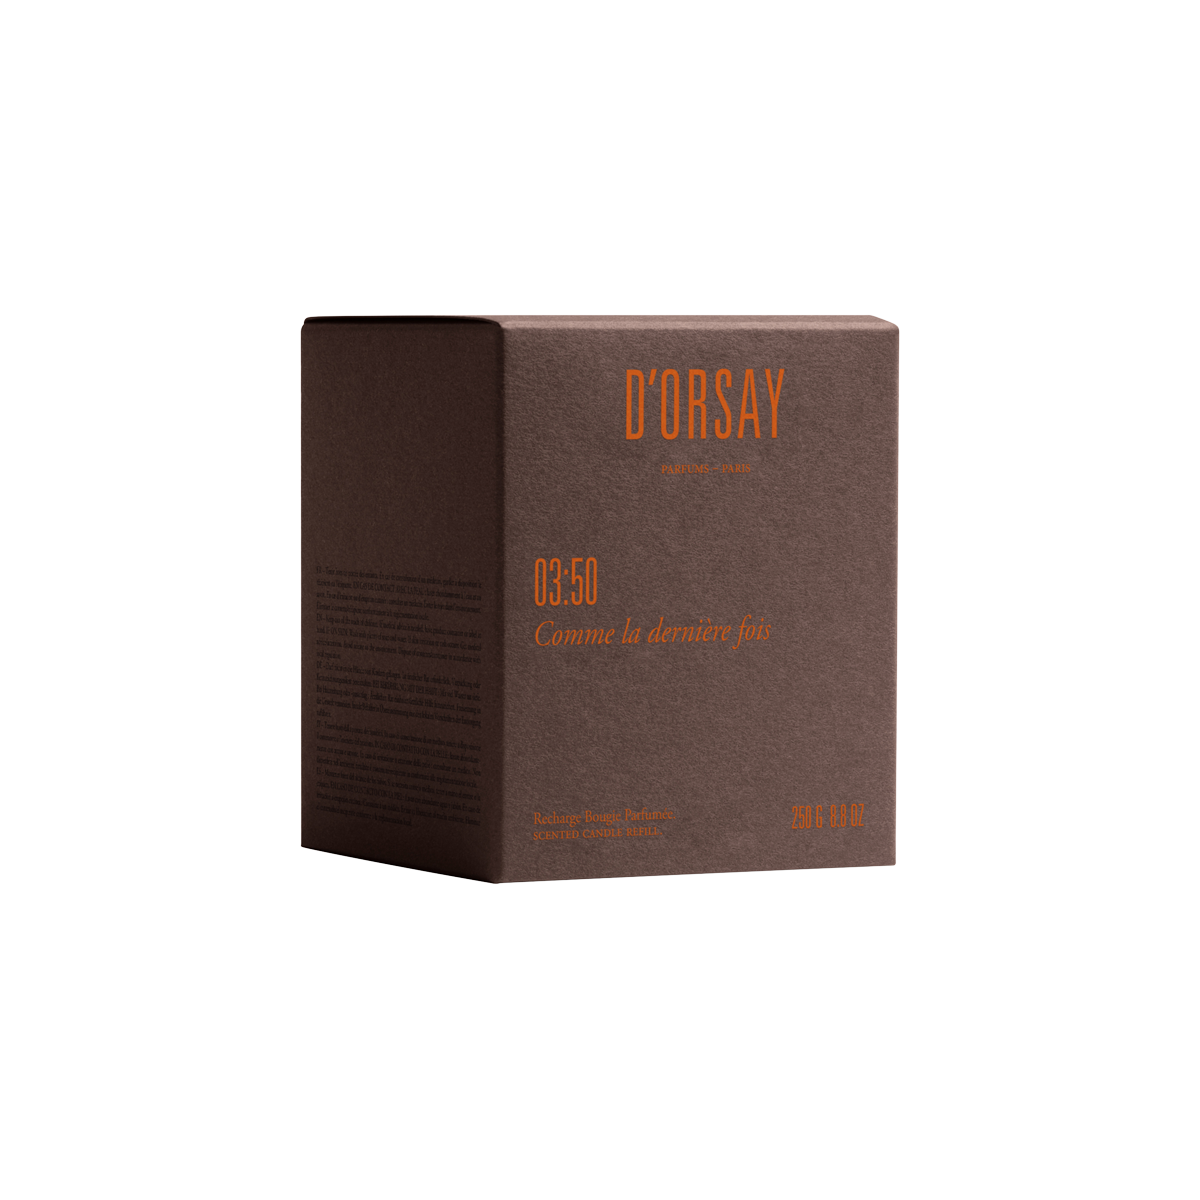 D'Orsay - Scented Candle 03:50 Refill